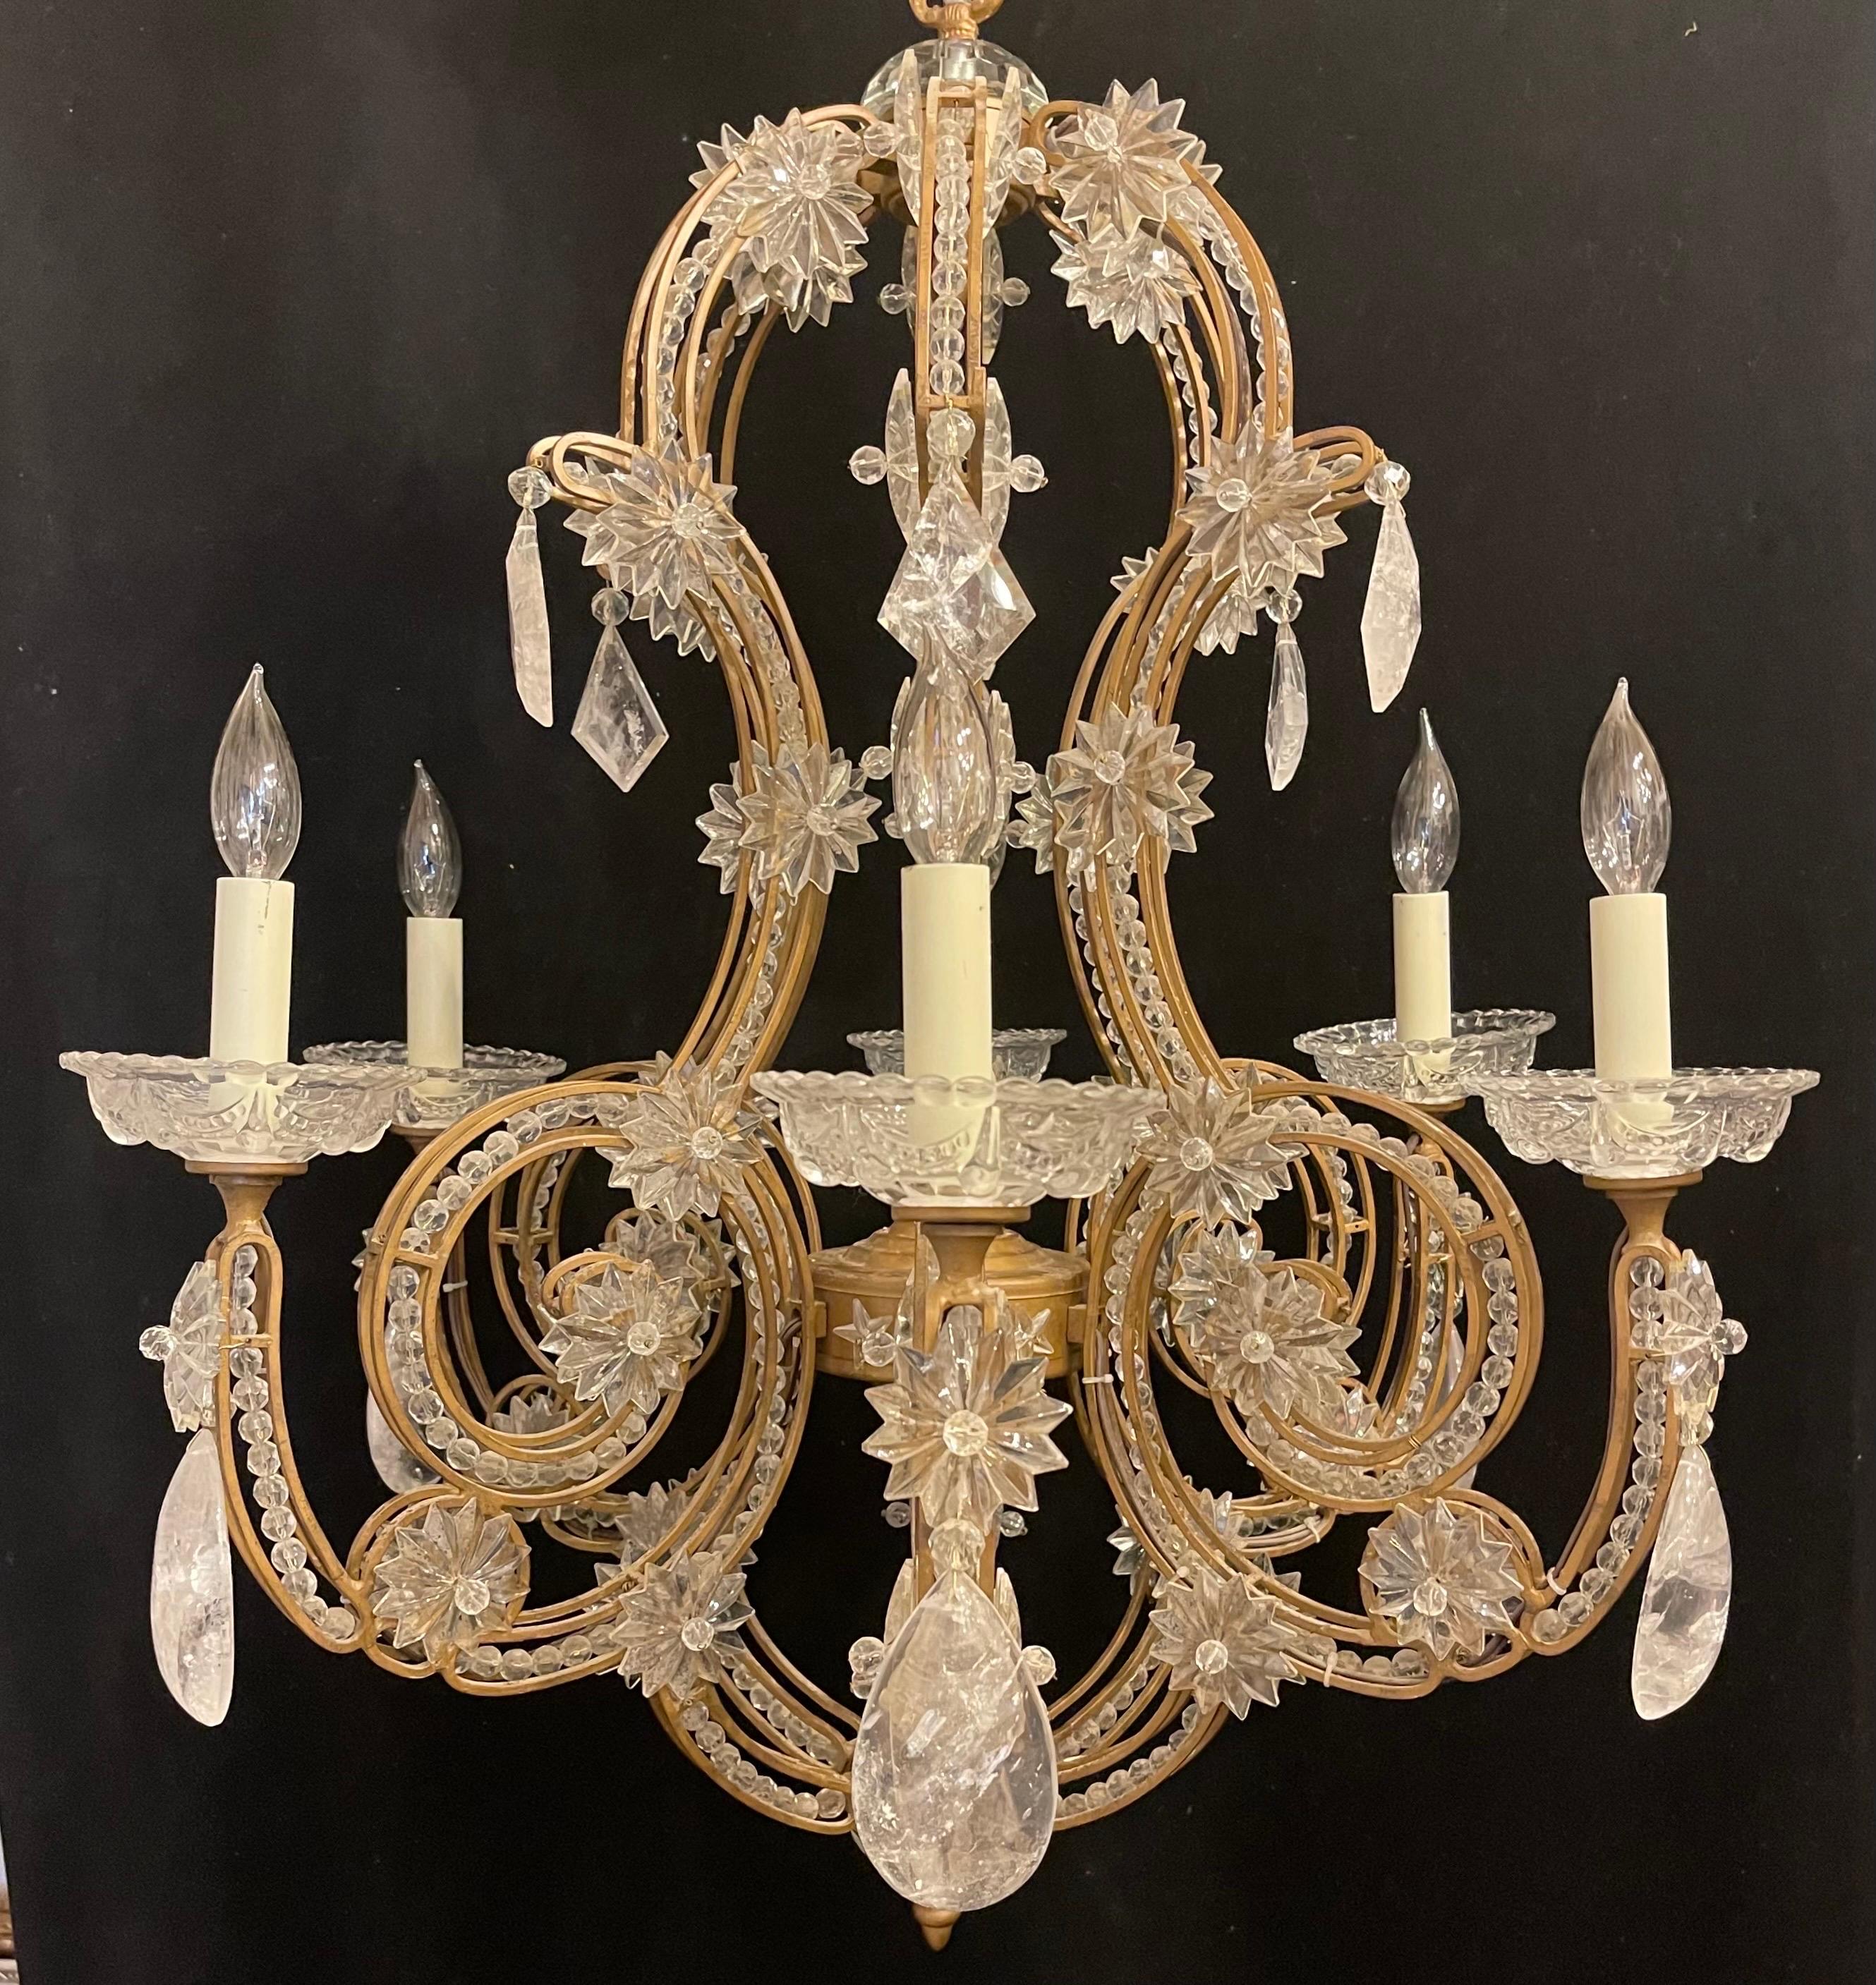 A wonderful crystal beaded bird cage chandelier dressed with rock crystals in the manner of: Vaughan, Maison Baguès & Jansen with a gold gilt frame this chandelier has 6 candelabra lights leading to beautiful crystal swag bobeches.